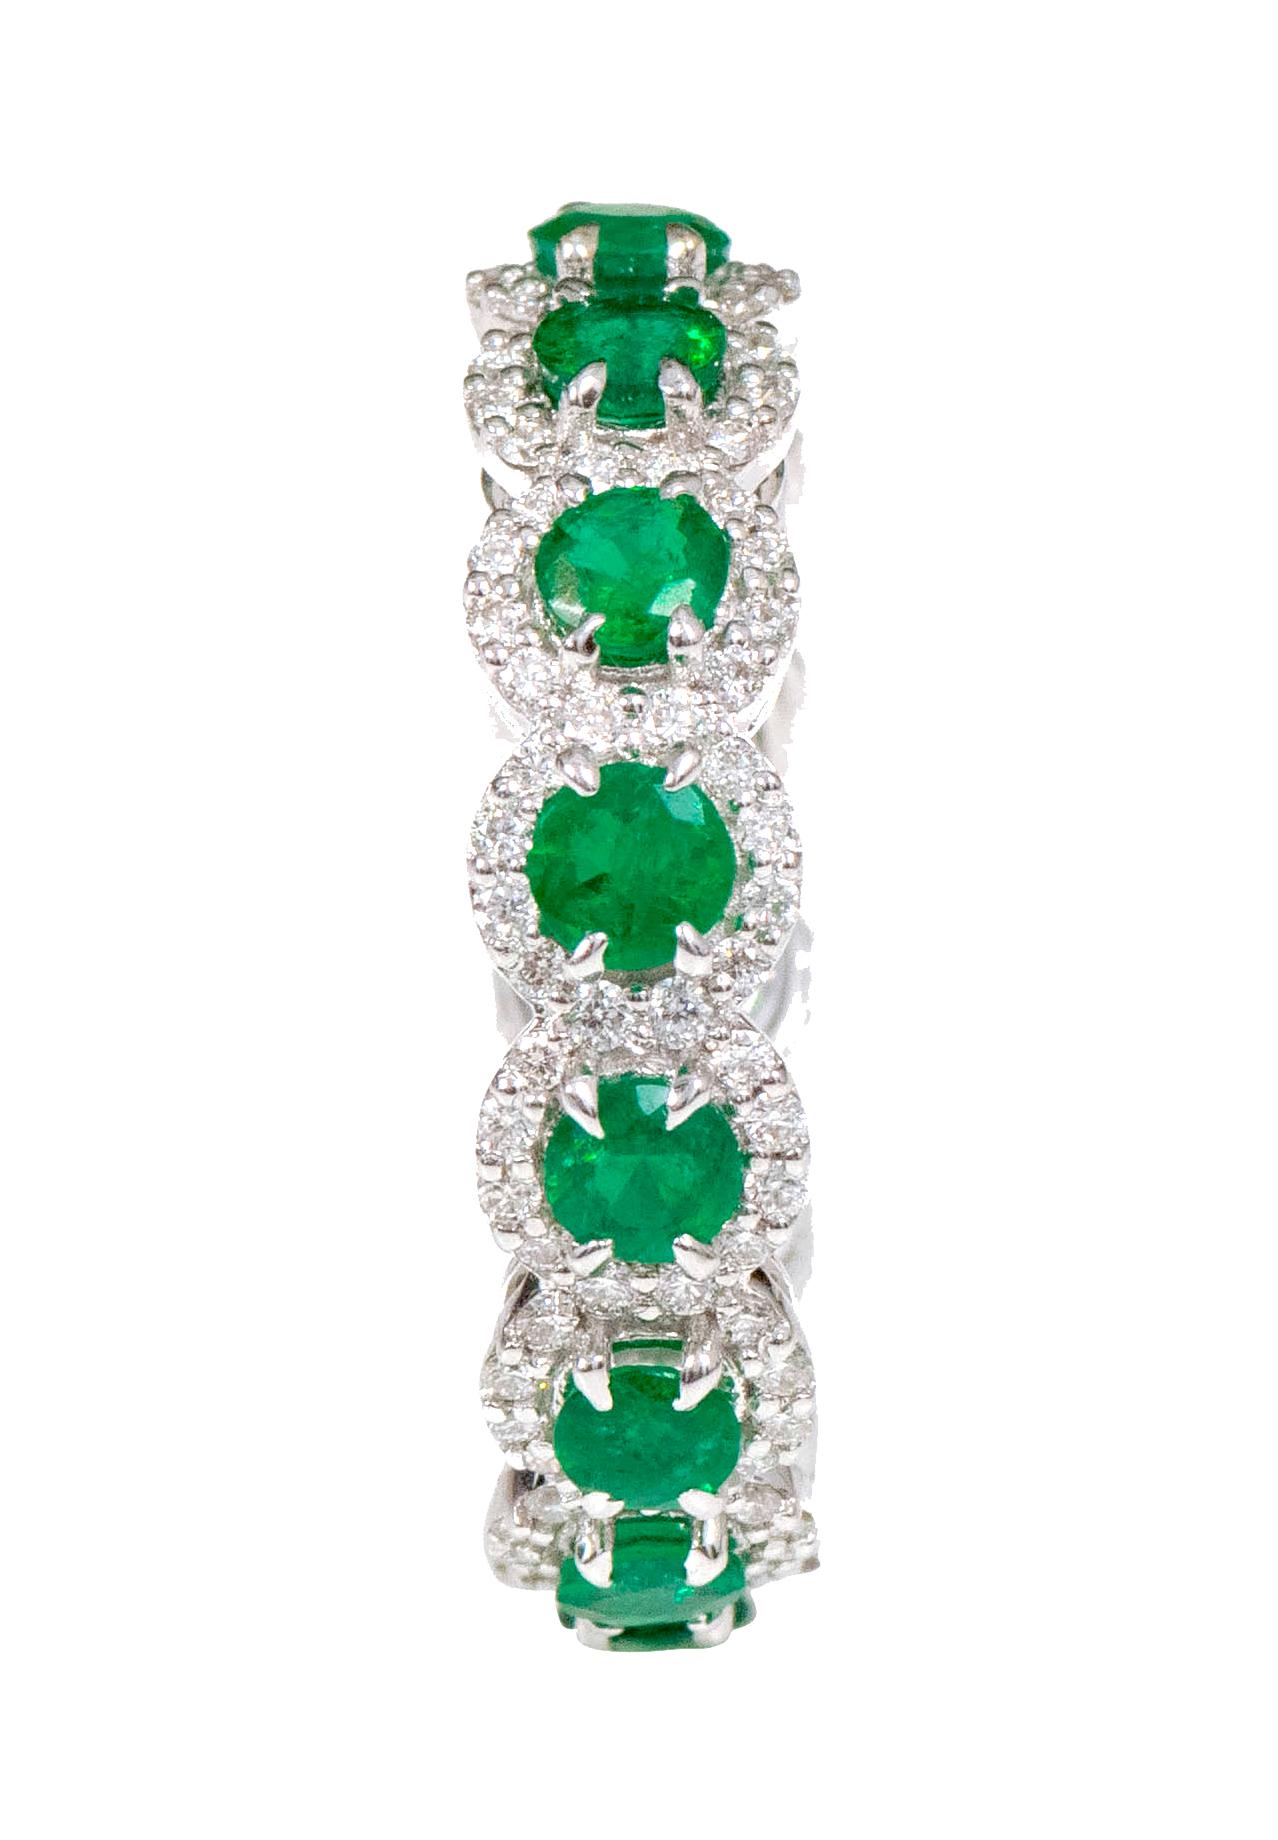 18 Karat White Gold 3.39 Carat Emerald and Diamond Cluster Eternity Band Ring

This incredible parakeet green emerald and diamond cluster band is remarkably brilliant. The solitaire round cut emeralds in eagle prong setting are magnificently